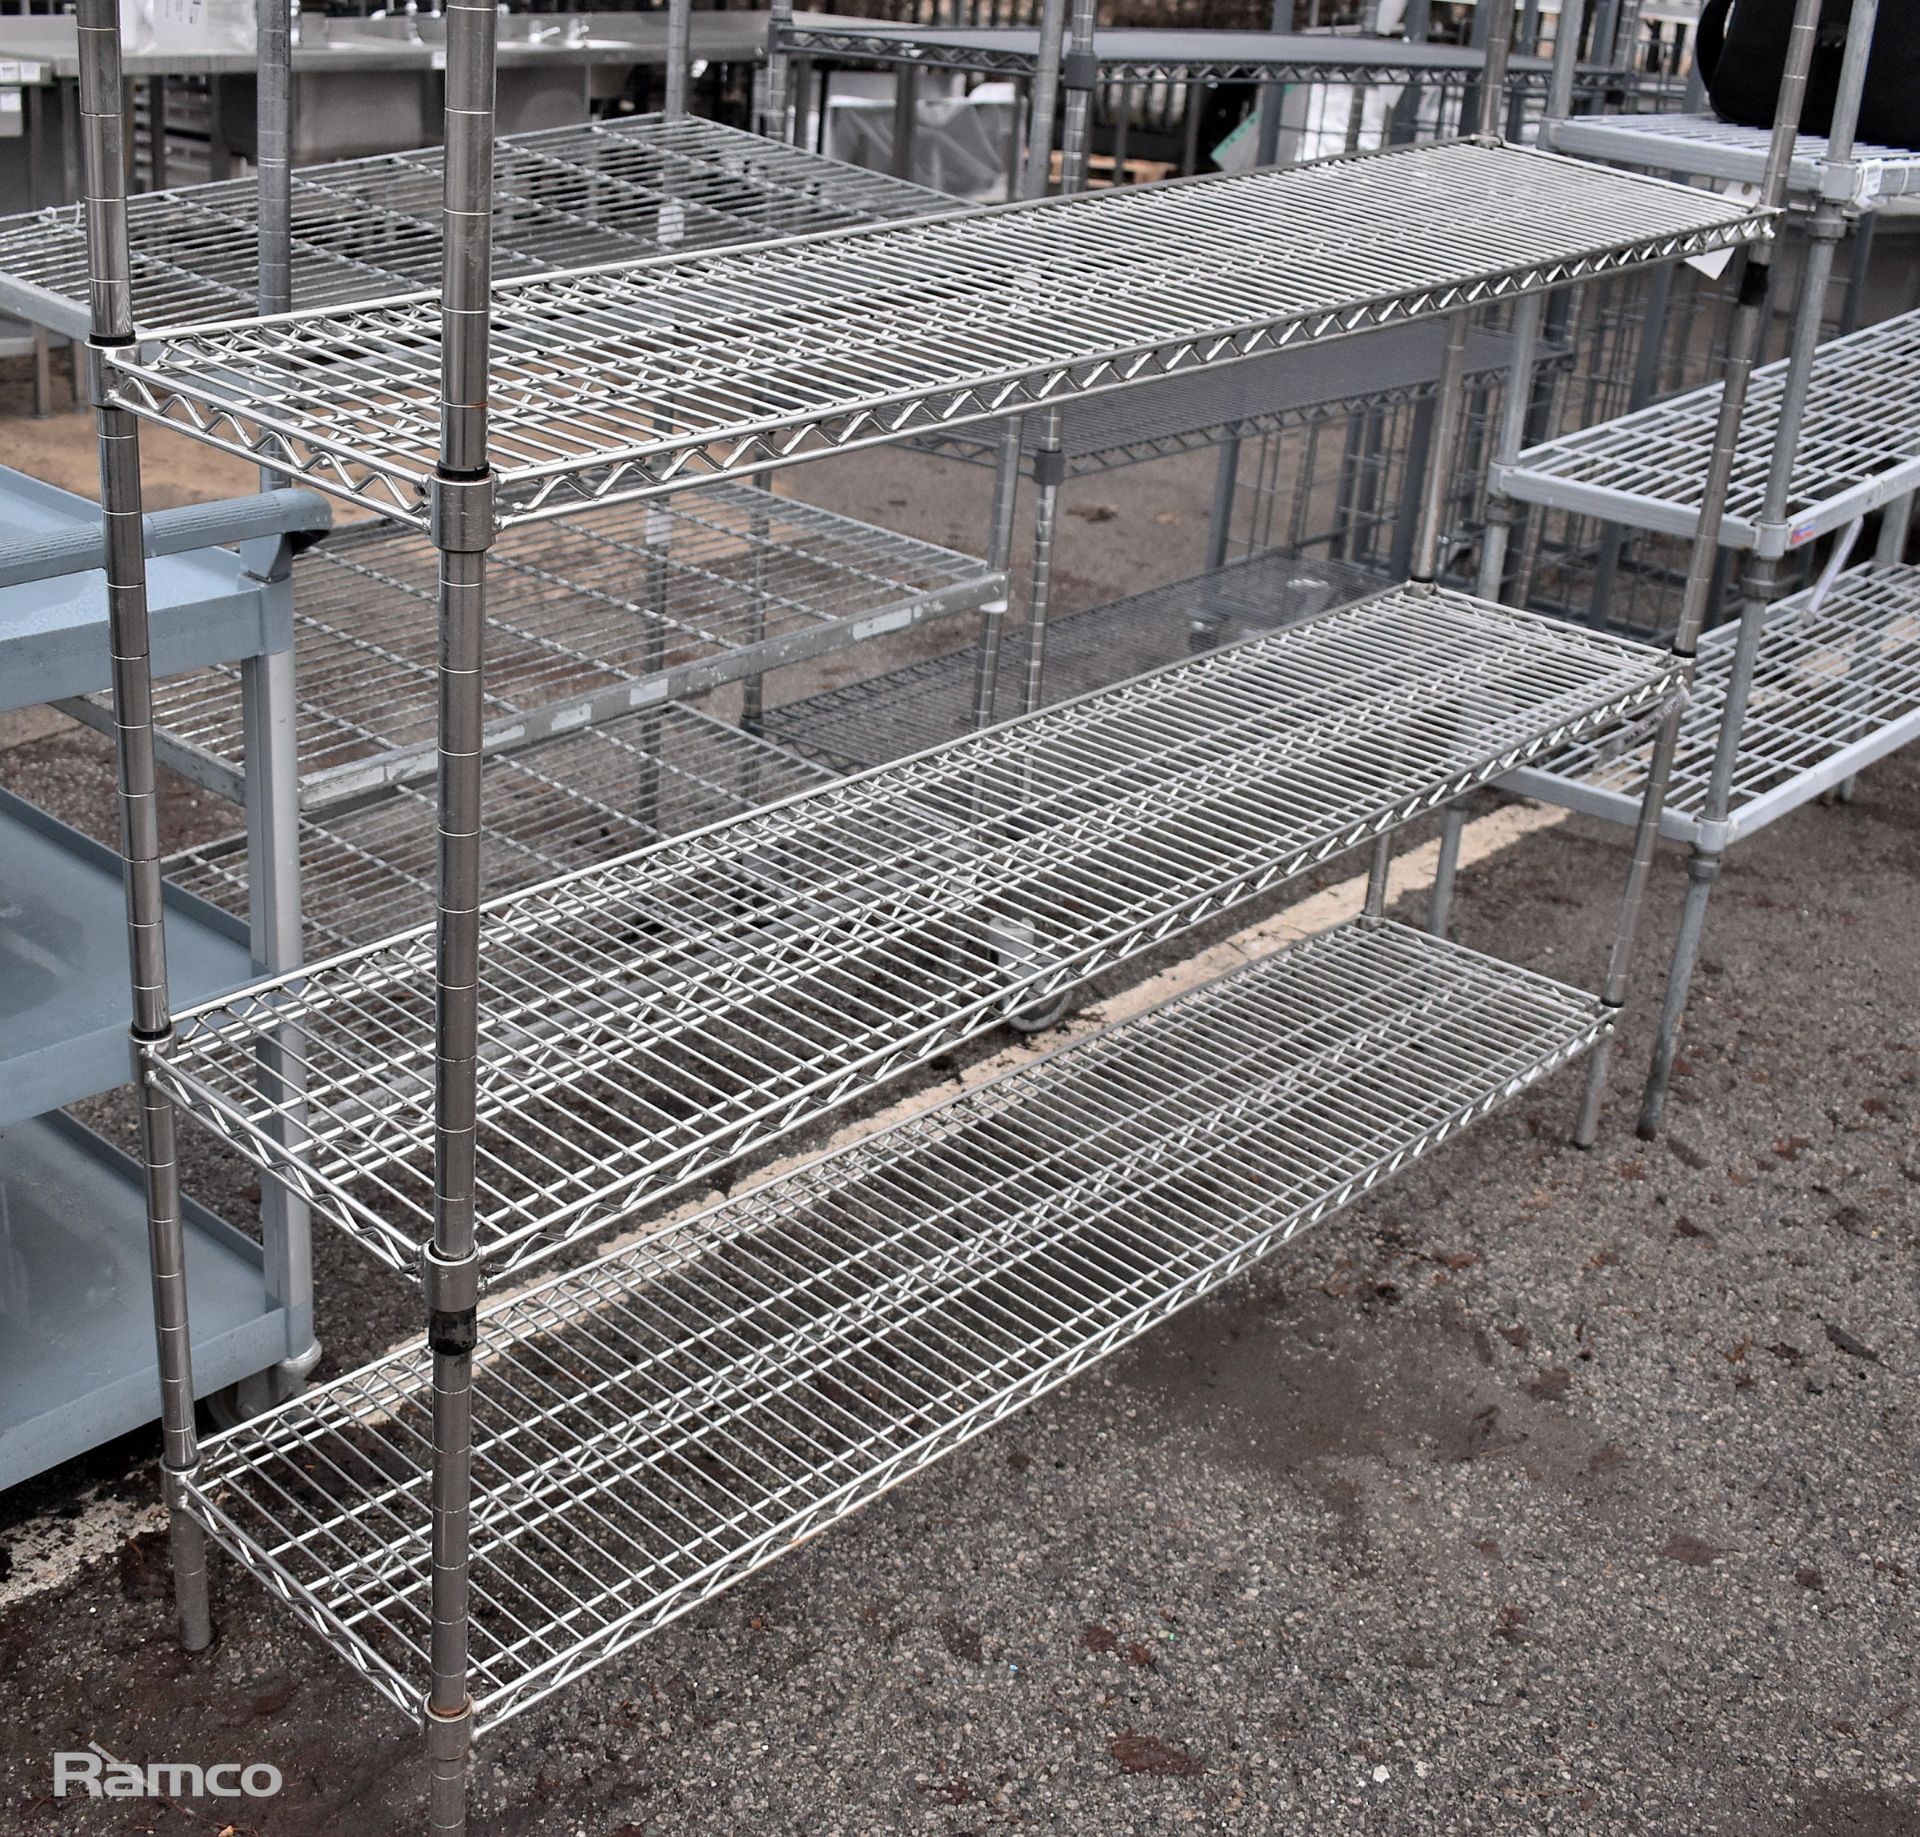 Stainless steel 4 tier wire racking - L179 x W38 x H167cm - Image 2 of 3